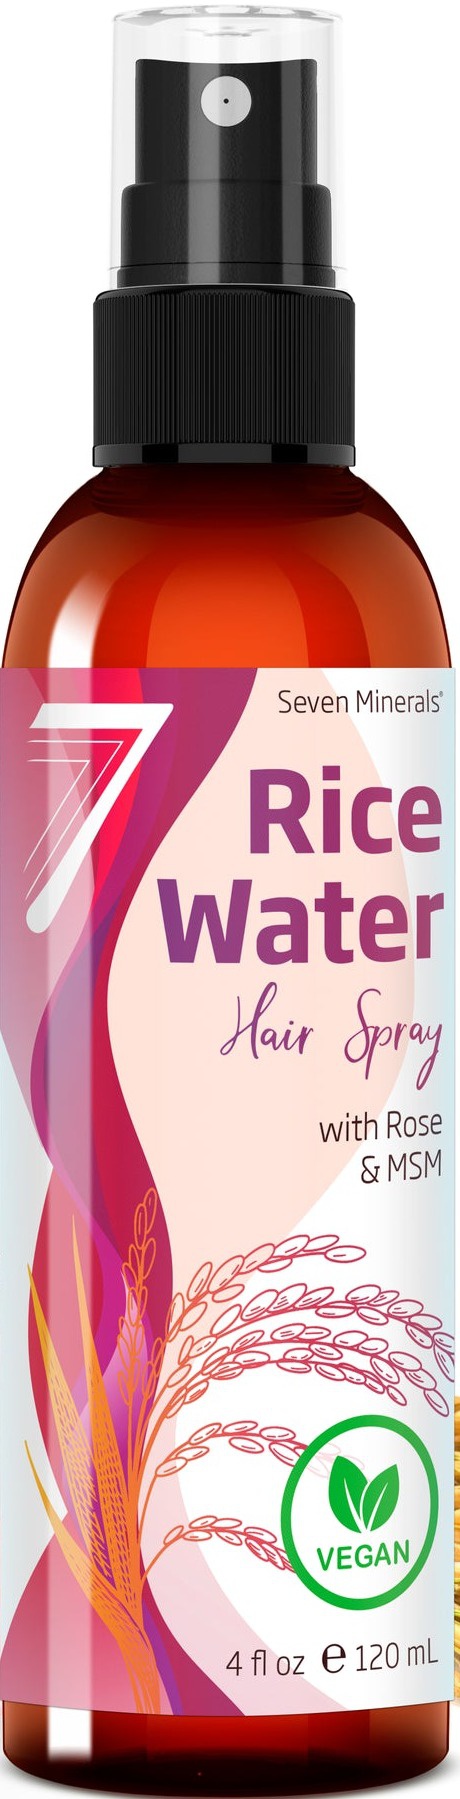 Seven Minerals Rose Rice Water Spray ingredients (Explained)